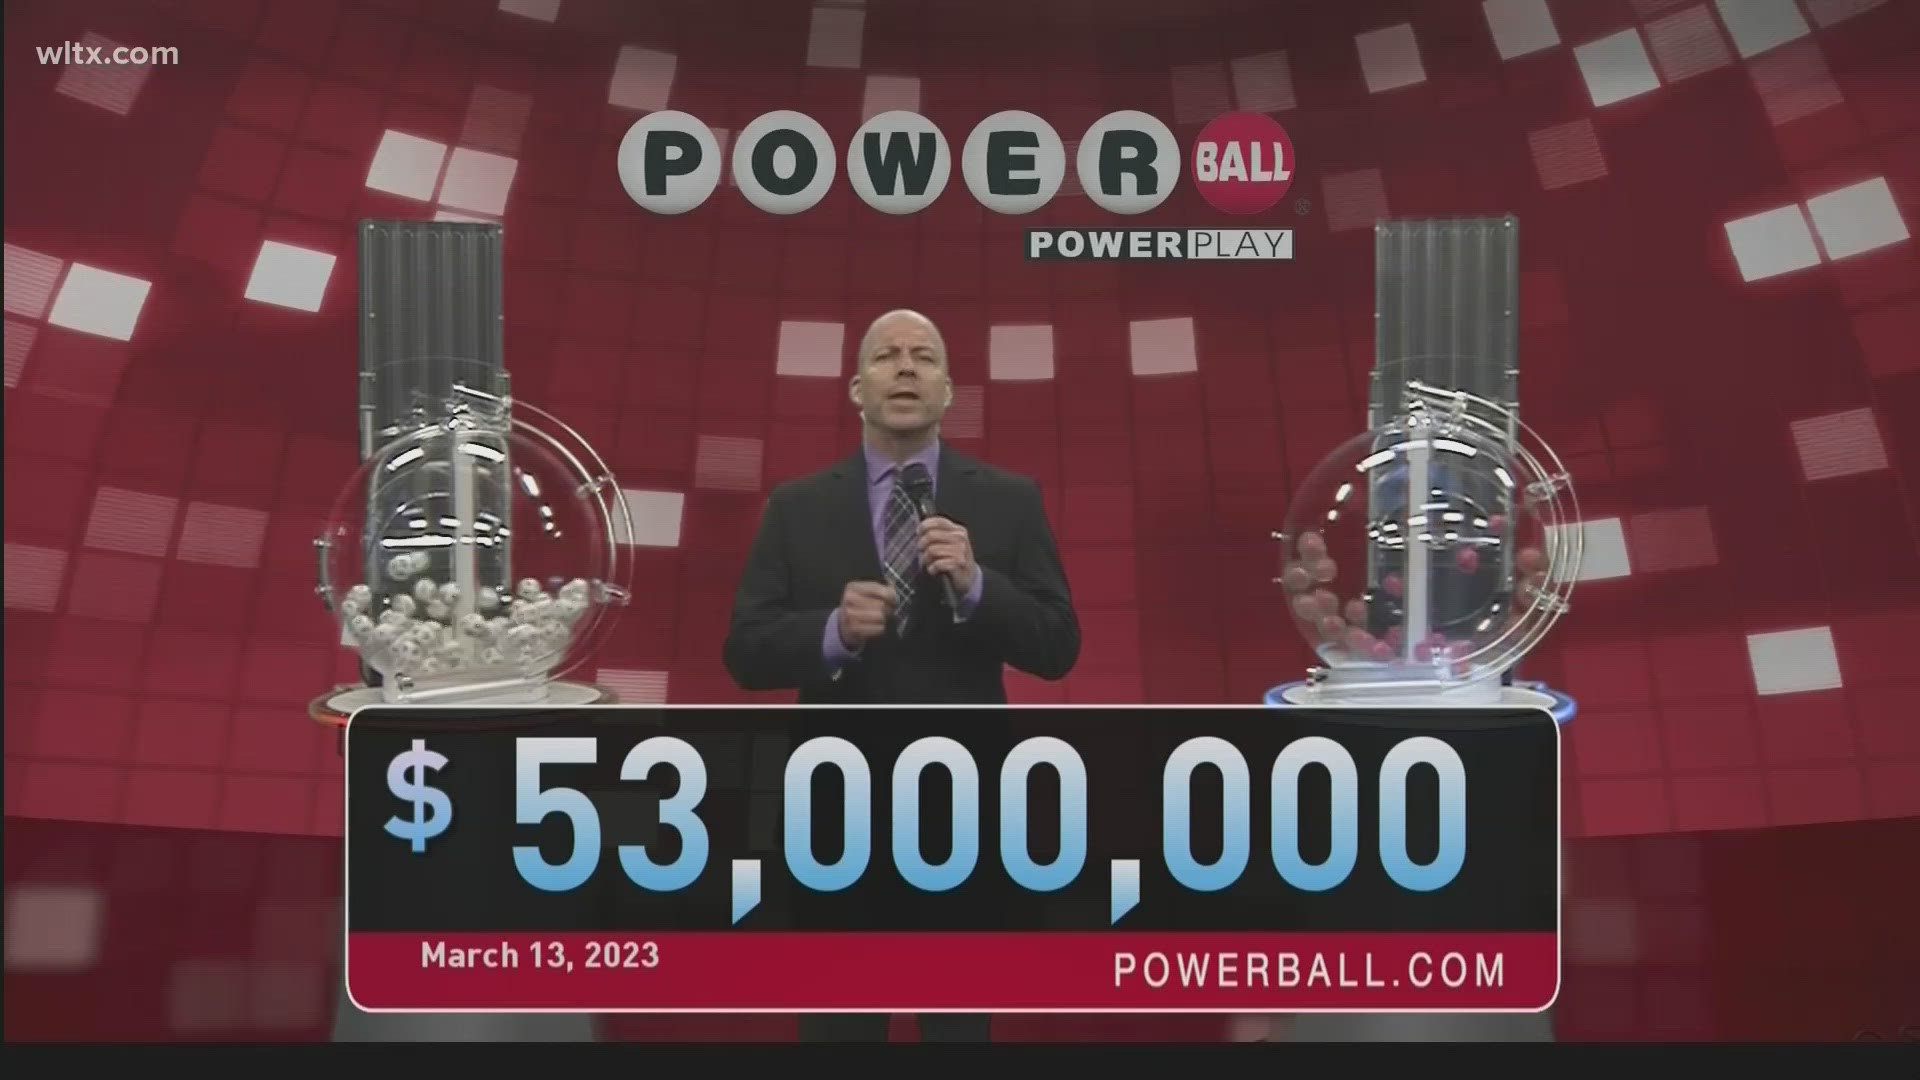 Here are the winning Powerball numbers for Monday, March 13, 2023.